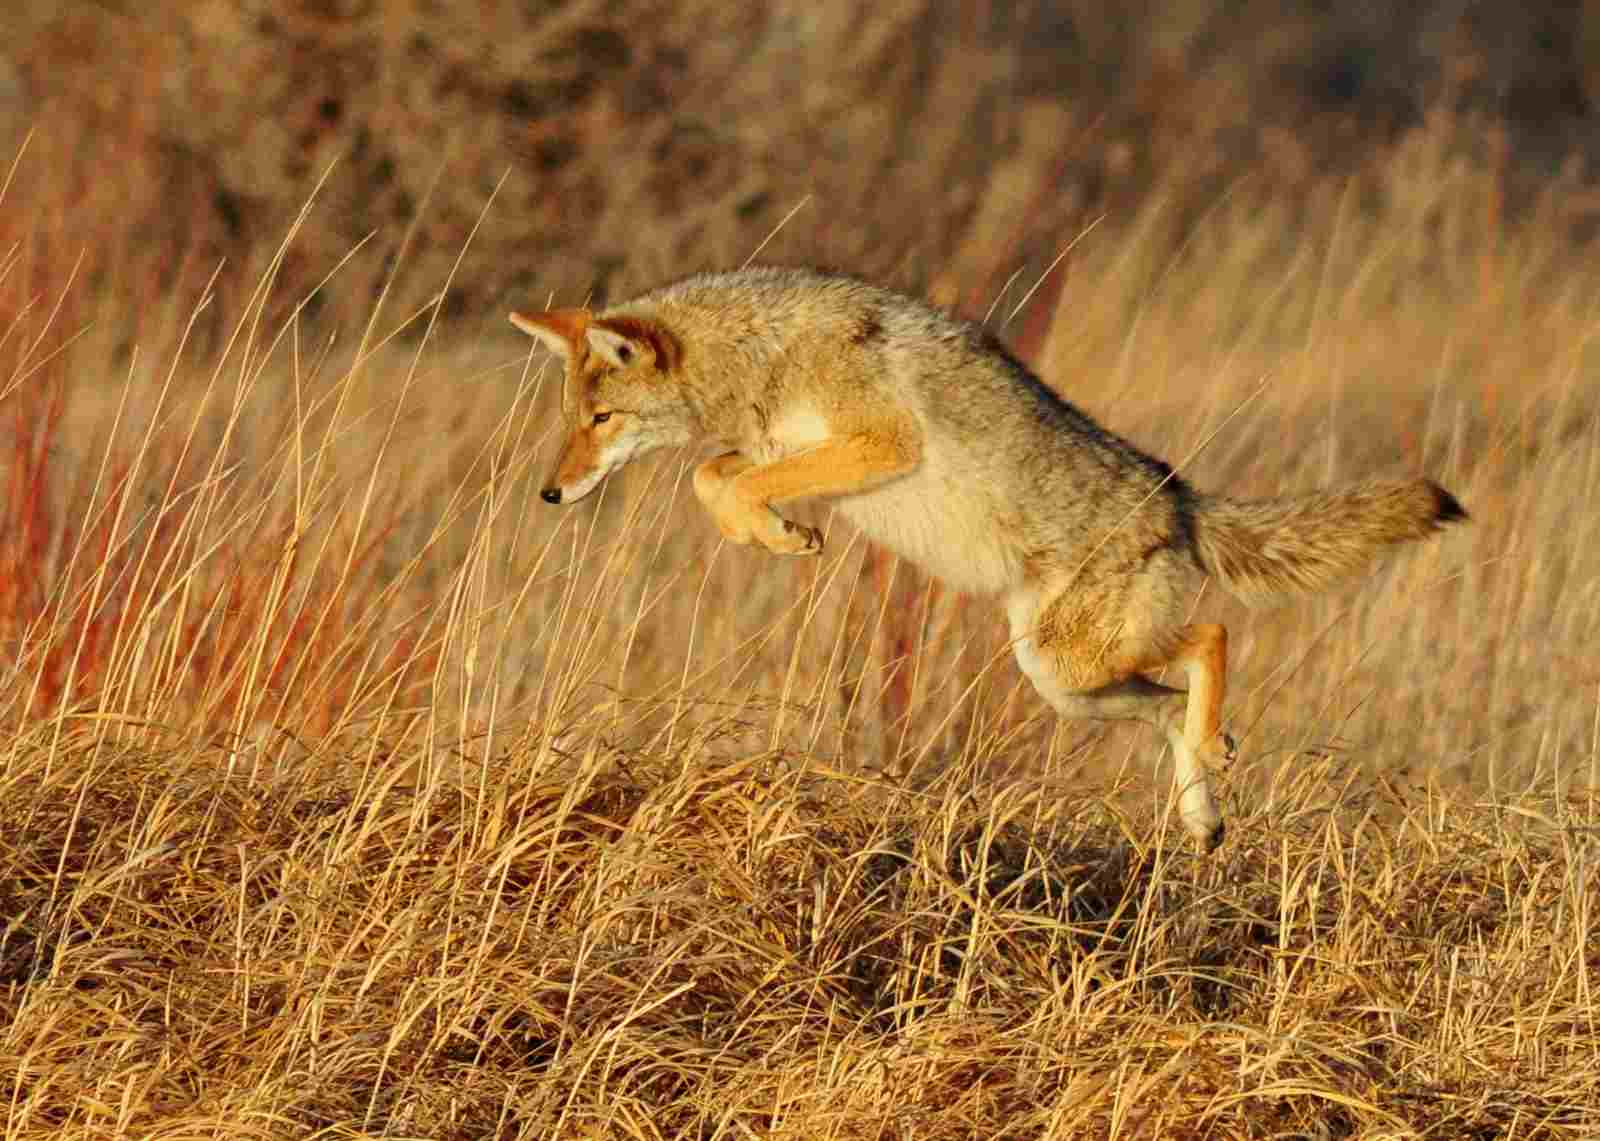 Coyote Vs Dog: The Versatility of Coyotes Ensures Their Survival in the Wild (Credit: USFWS Mountain-Prairie 2015 .CC BY 2.0.)